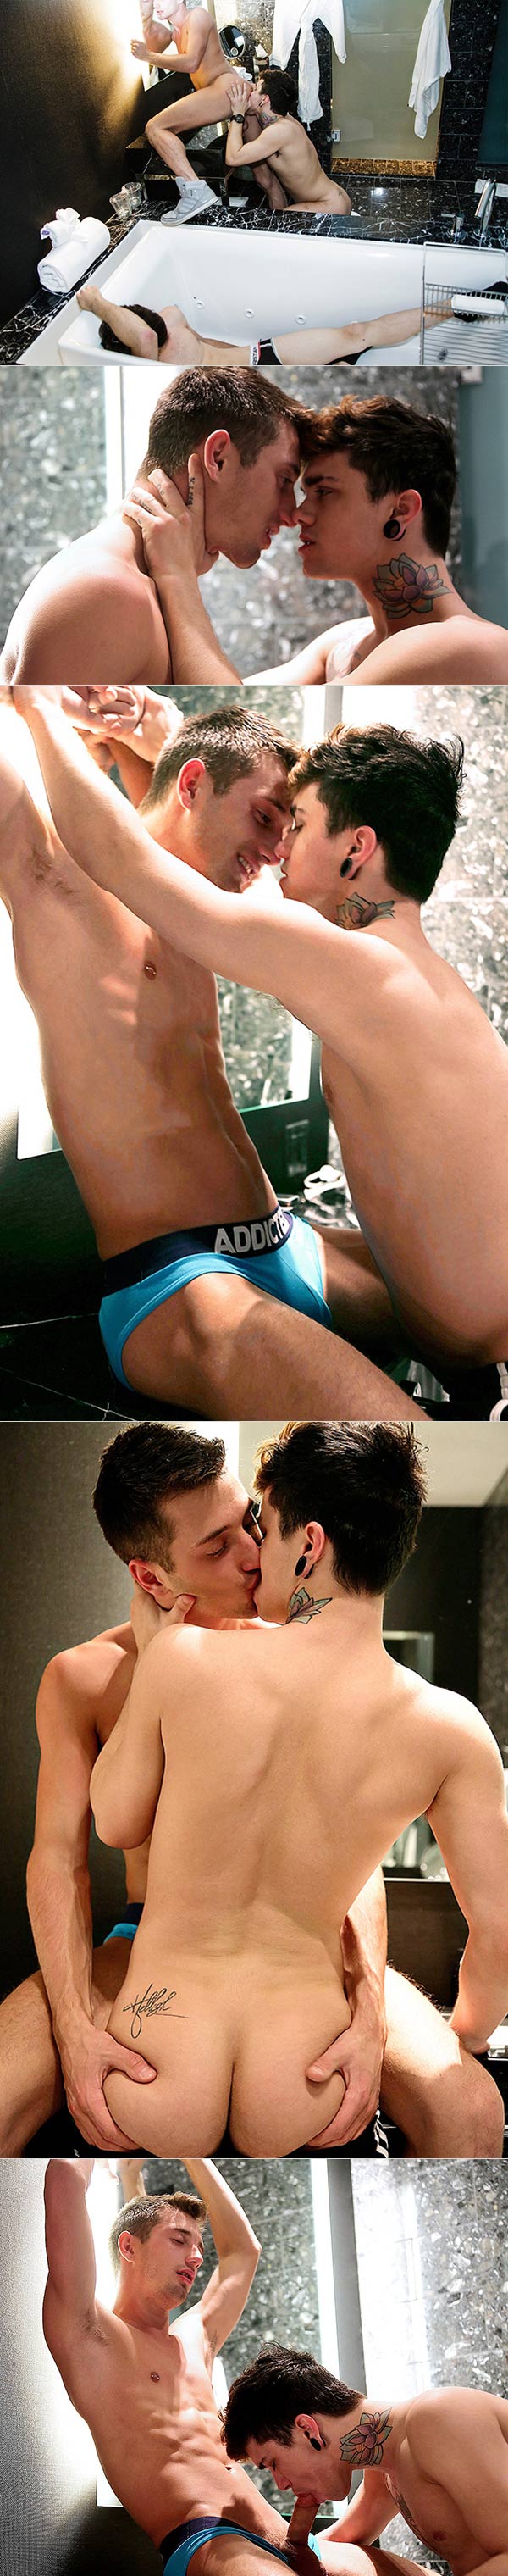 Max & Jake's ROADSTRIP: Episode III (THE BANGOVER featuring JD Phoenix & Aiden Summers) at CockyBoys.com